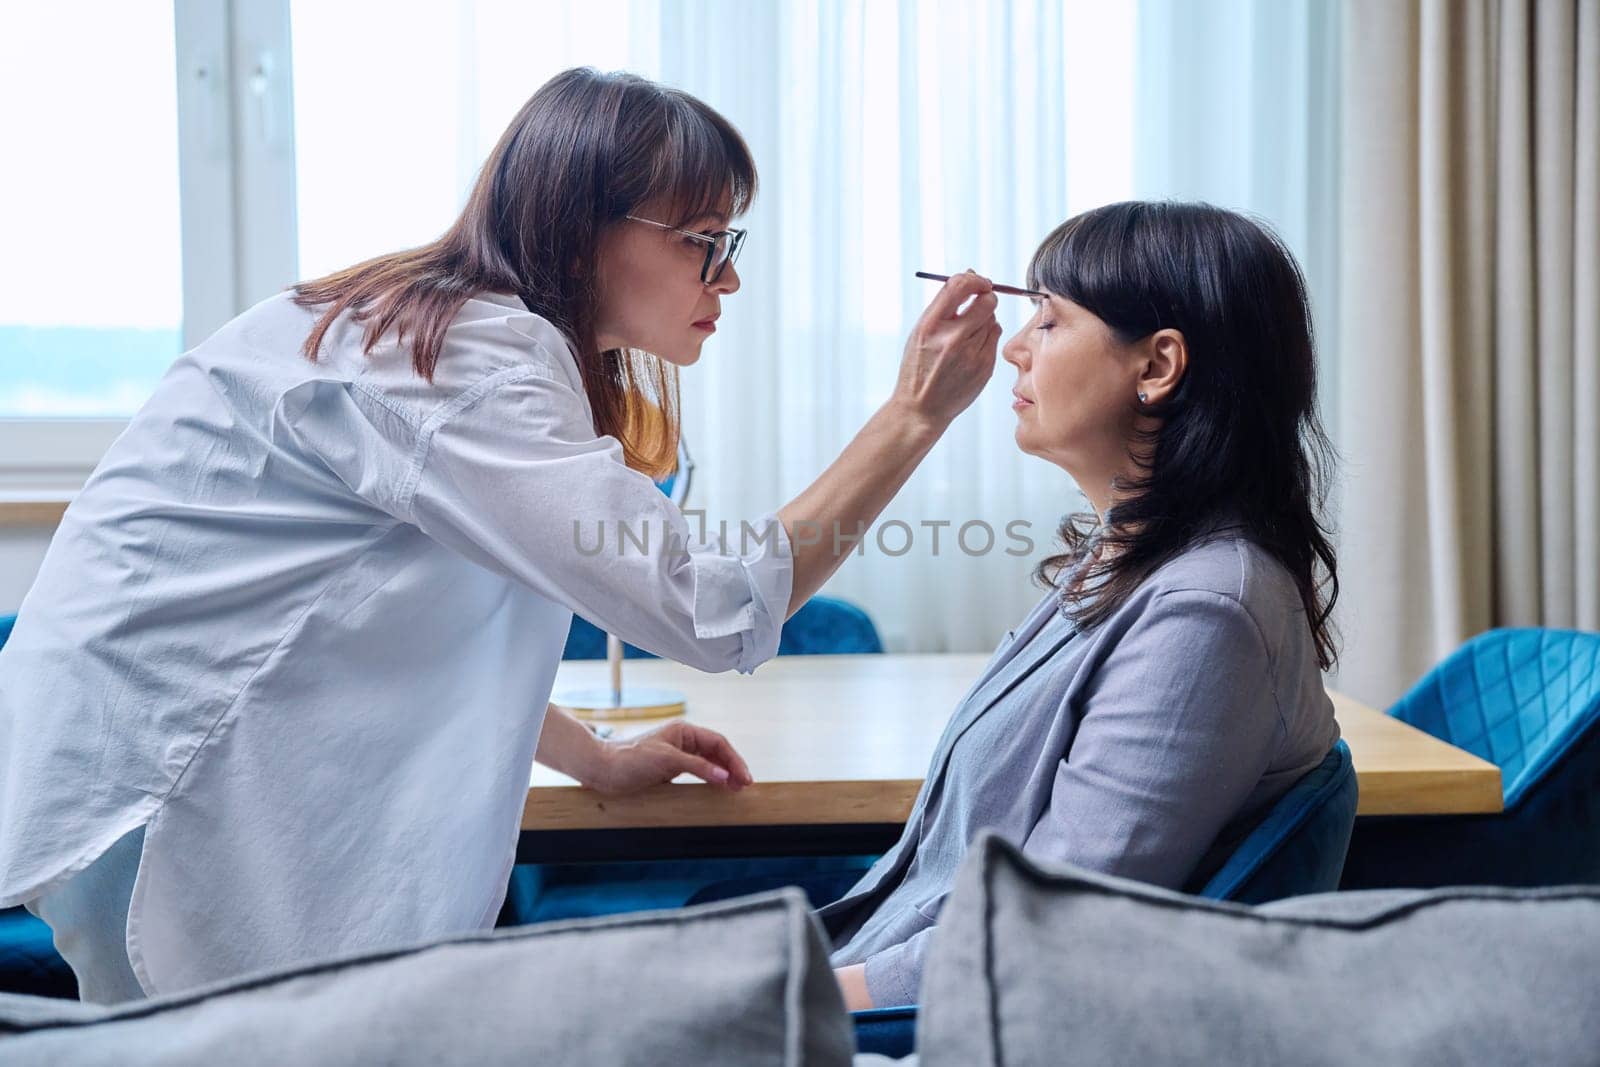 Makeup artist doing makeup for a mature business woman. Beauty, cosmetics, care, face, 50 years old woman